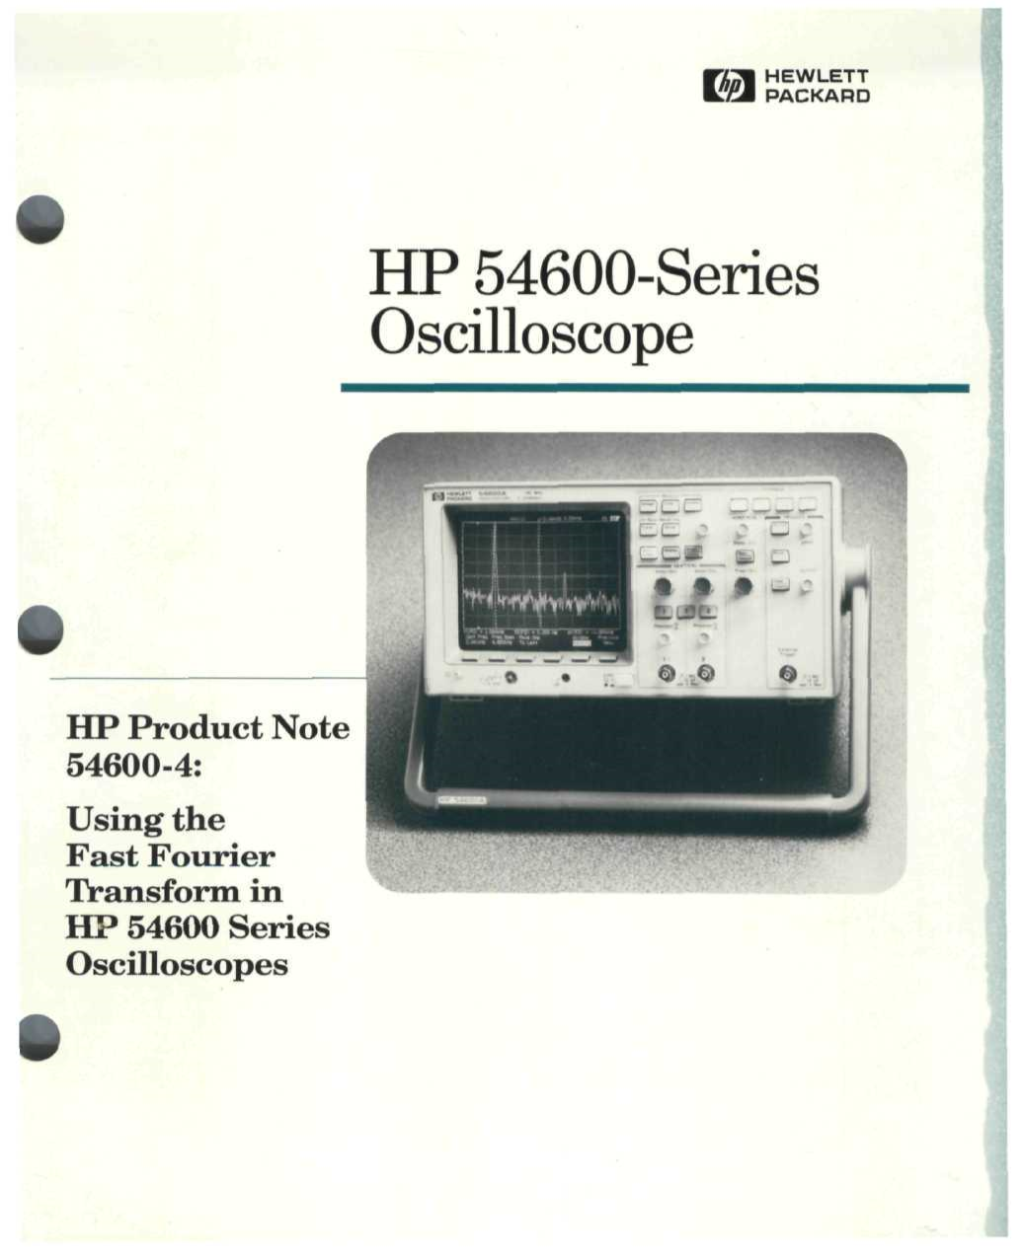 Using the Fast Fourier Transform in HP 54600 Series Oscilloscopes